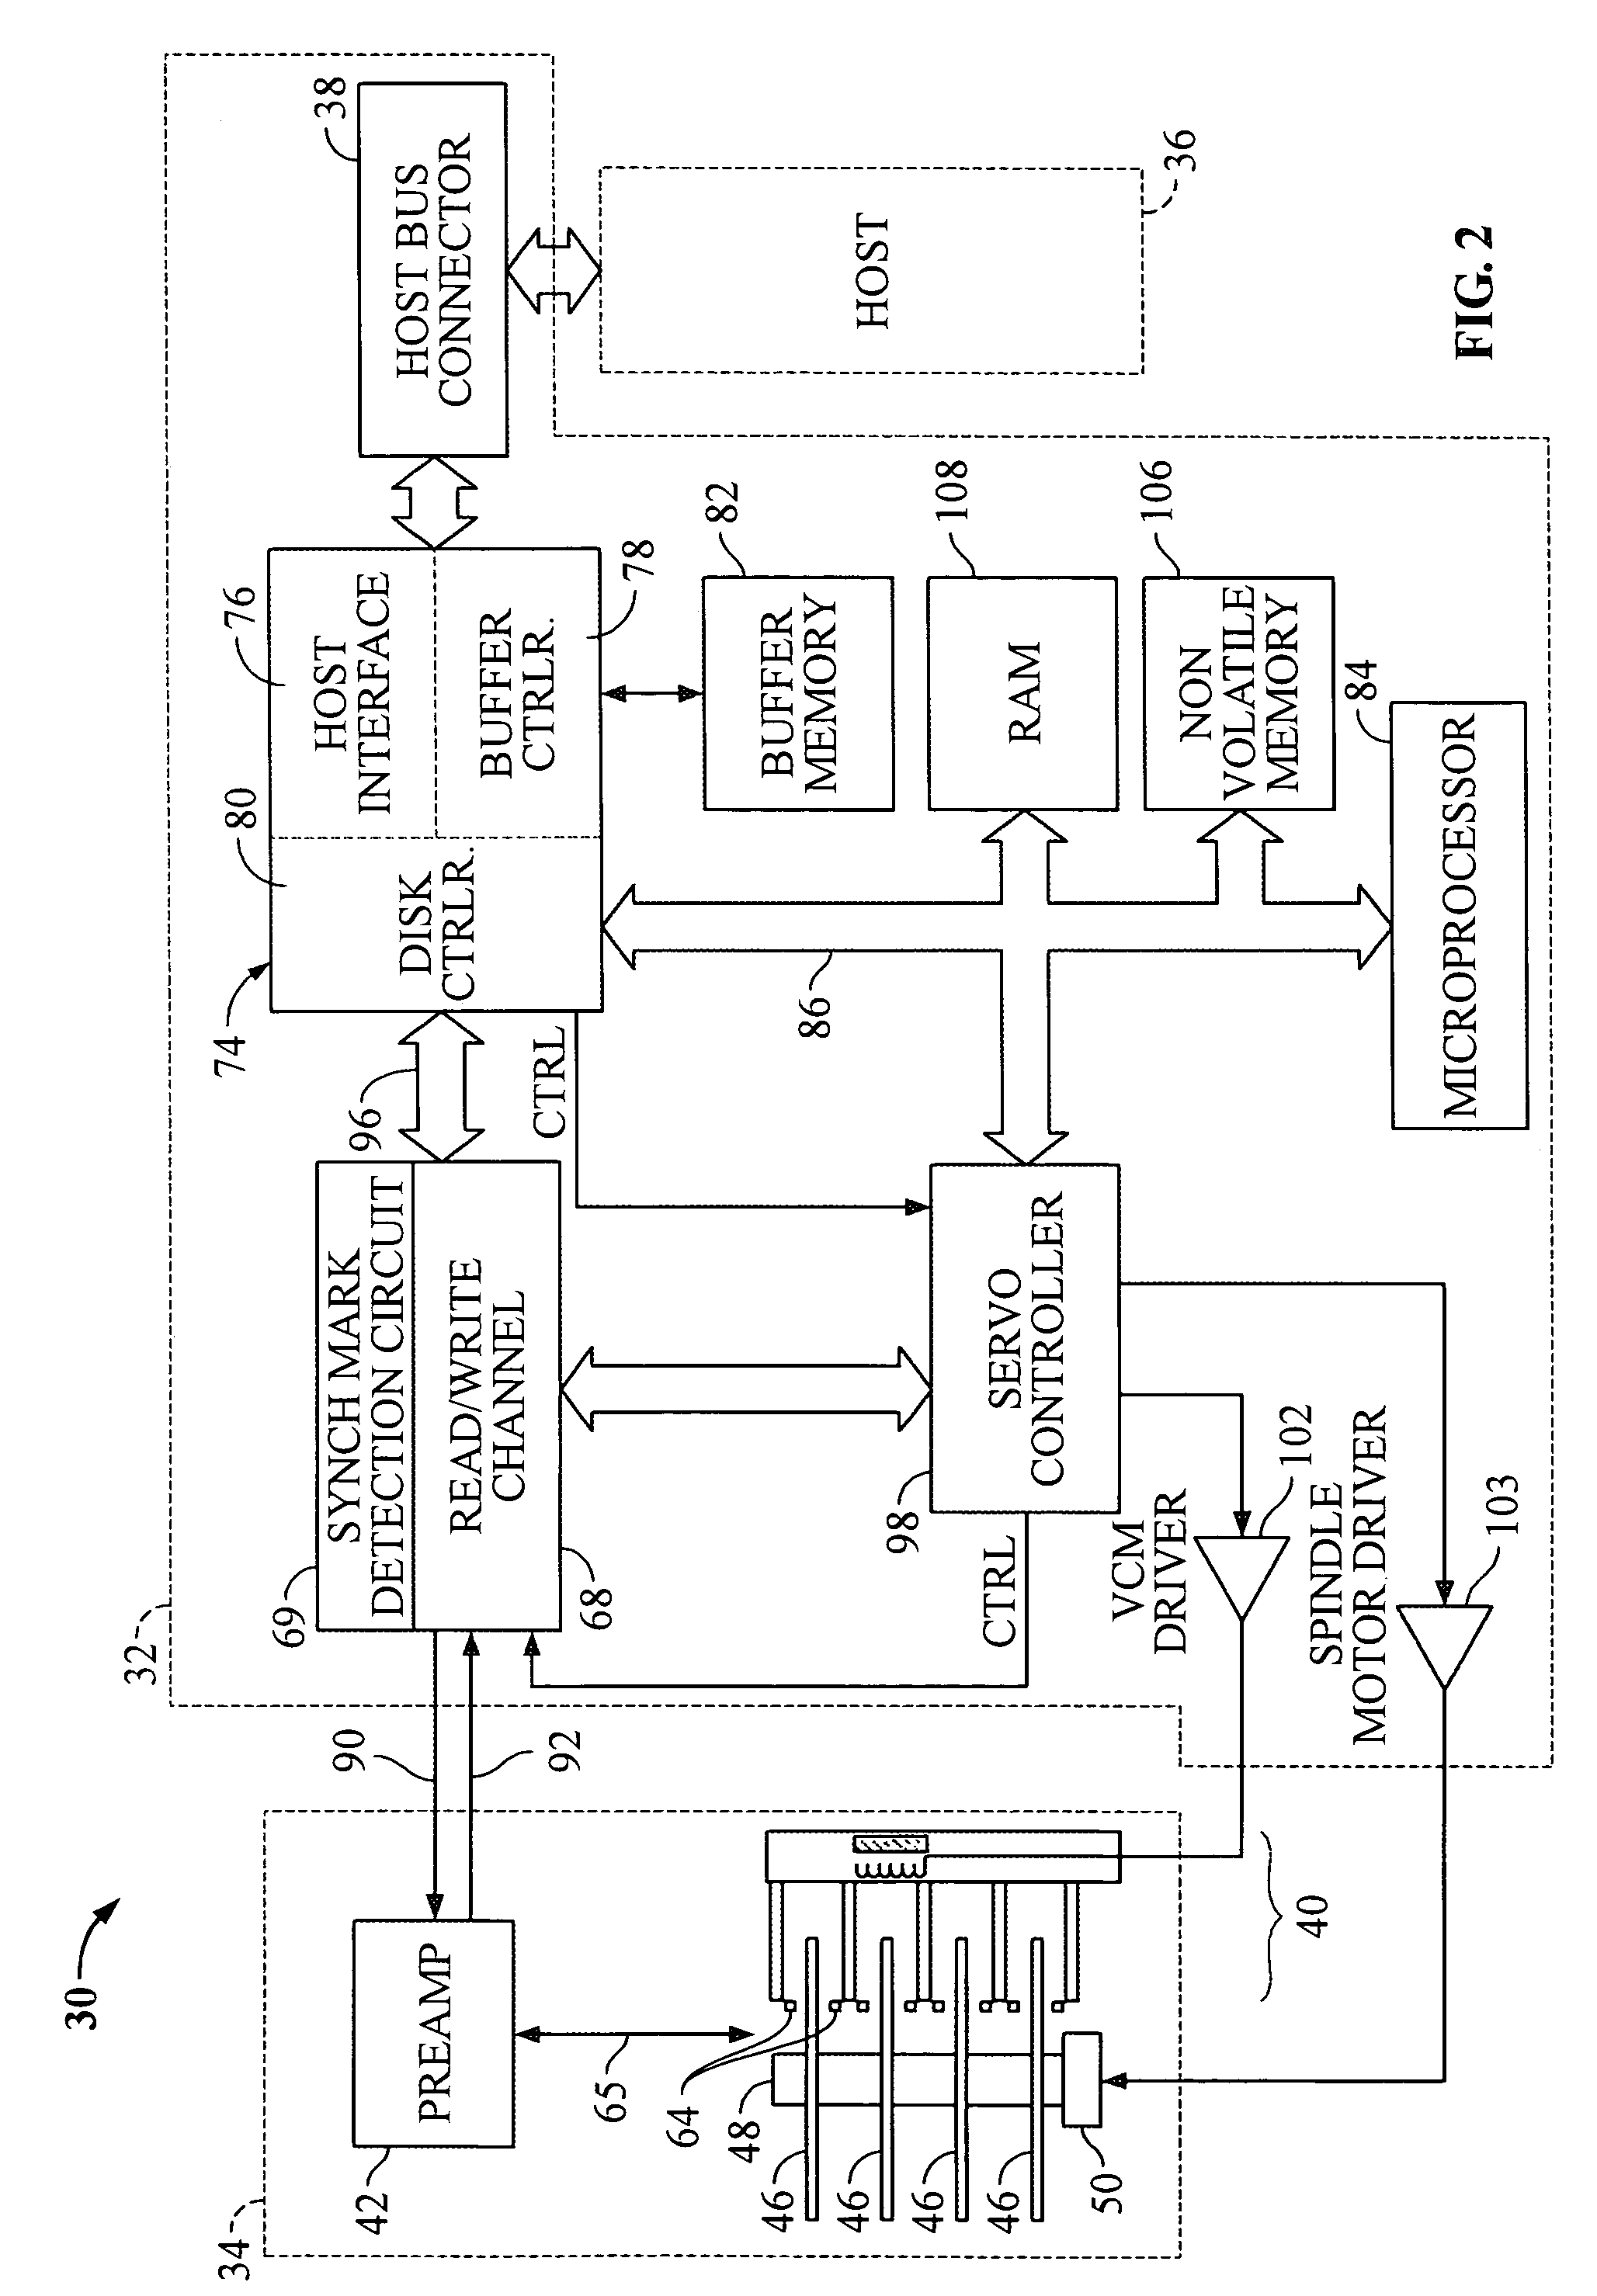 Servo synchronization validation techniques based on both servo synch marks and wedge identifiers in a rotating media storage device